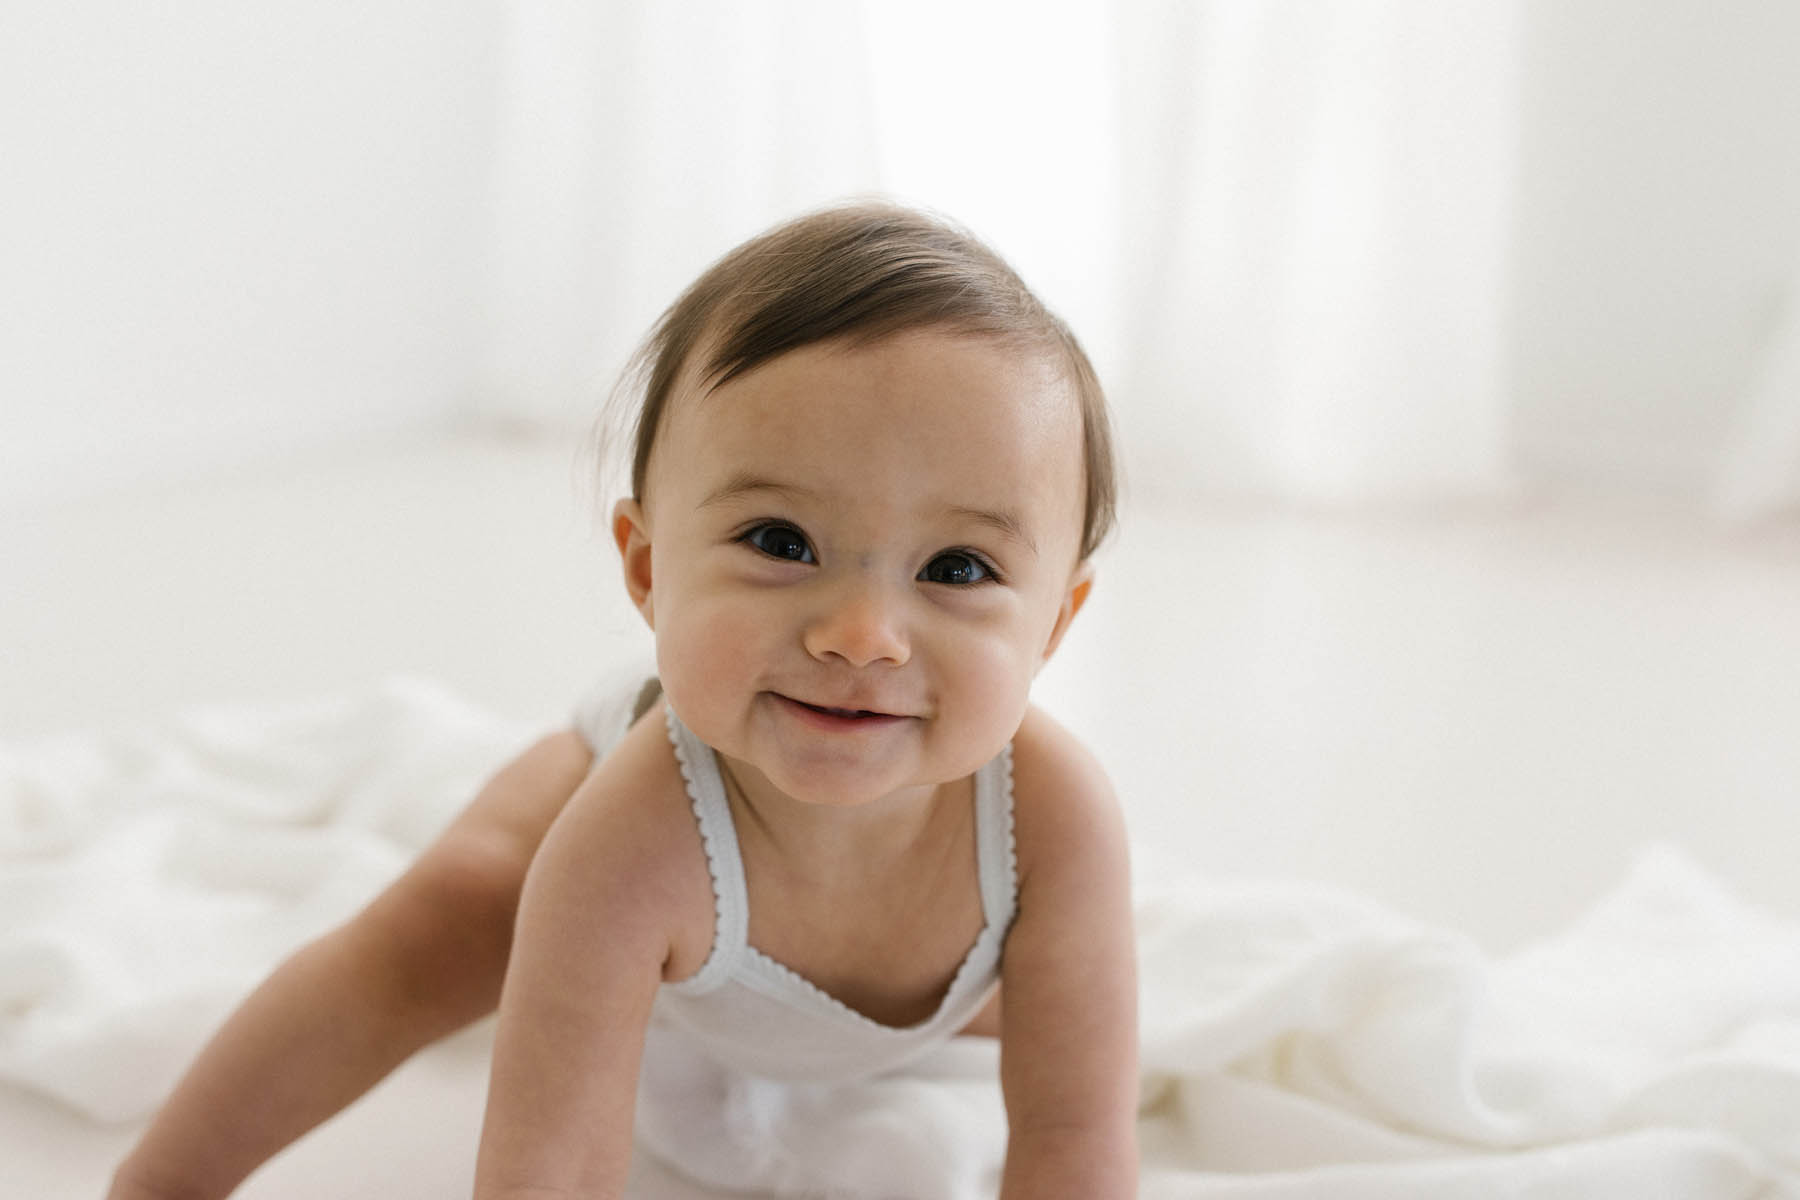 simple and natural baby session, photo by elle baker photography, smiling baby